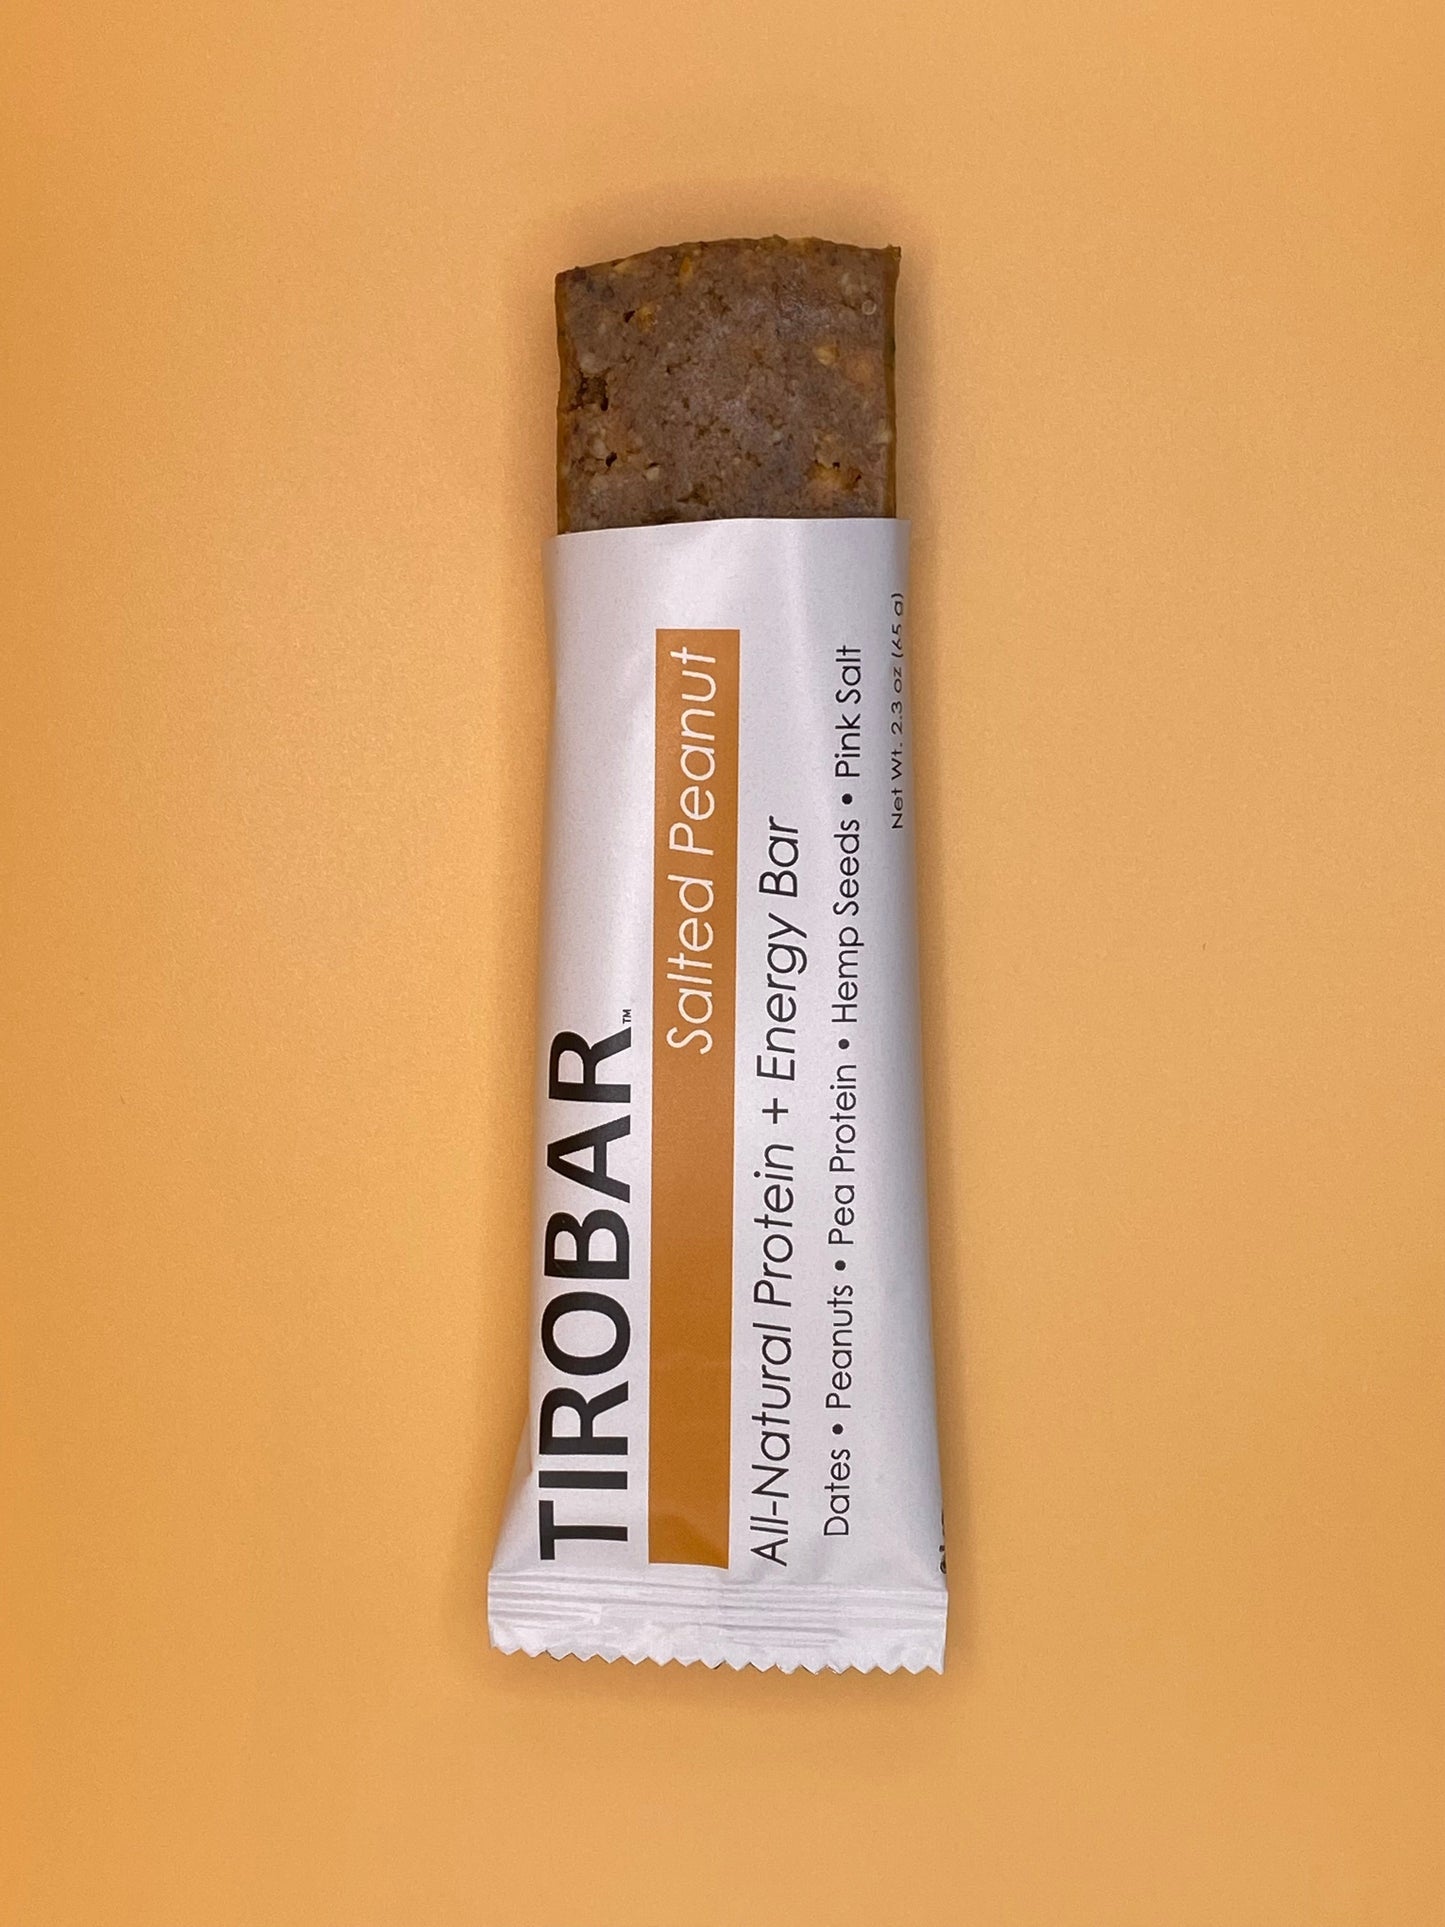 A salted peanut TIROBAR, a vegan and all natural protein bar, is shown half out the wrapper, showing peanuts and bar contents against an orange background. 